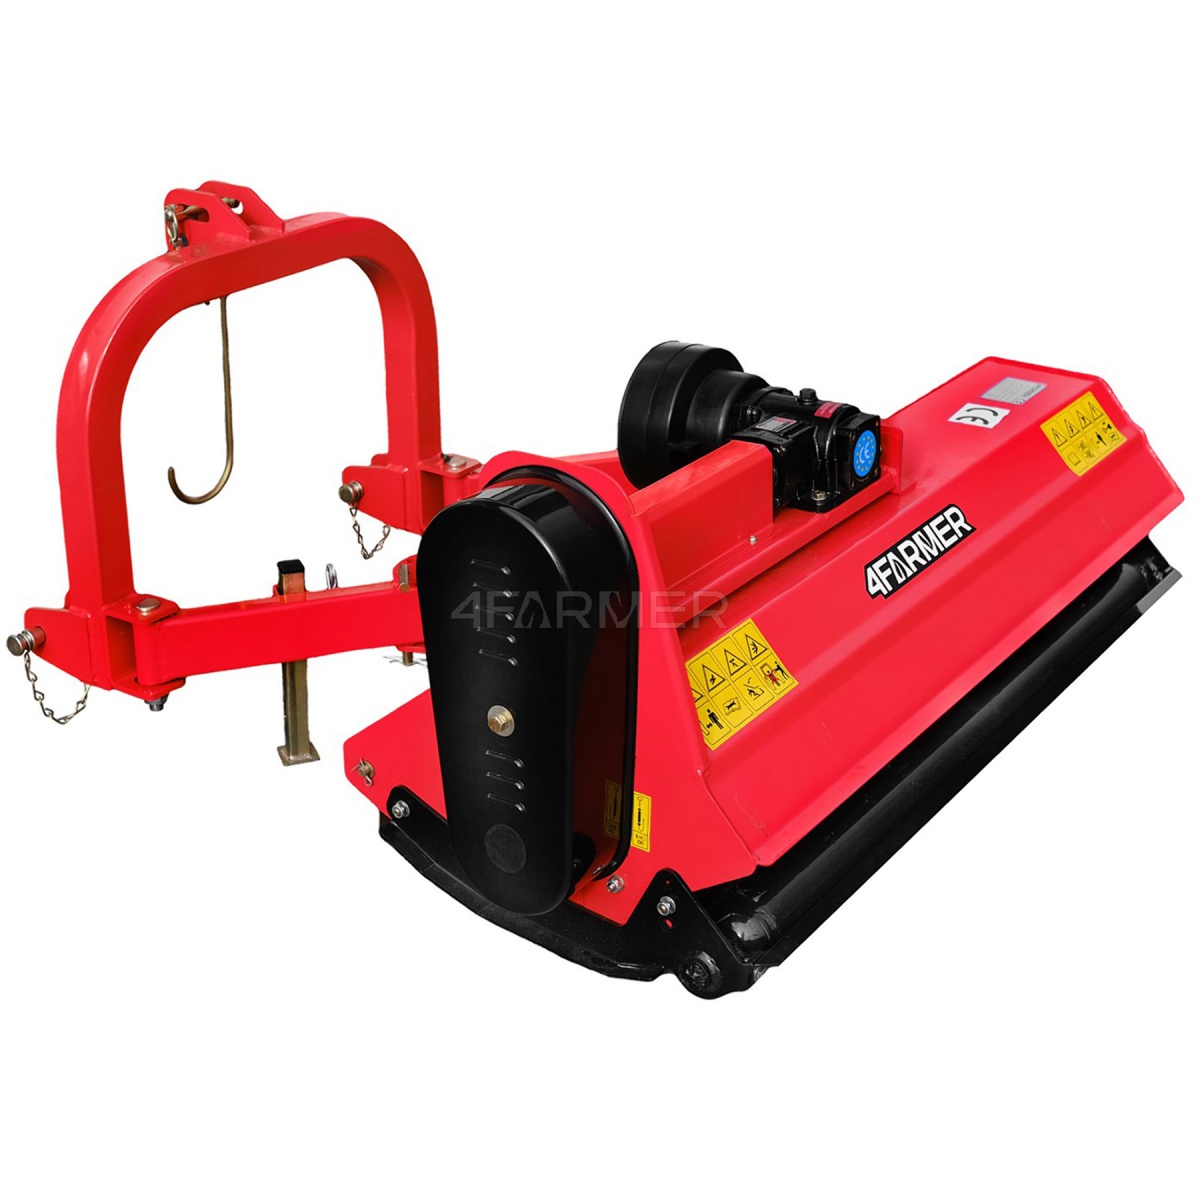 film with manual shift - Flail mower FLM 130 with manual shift 4FARMER